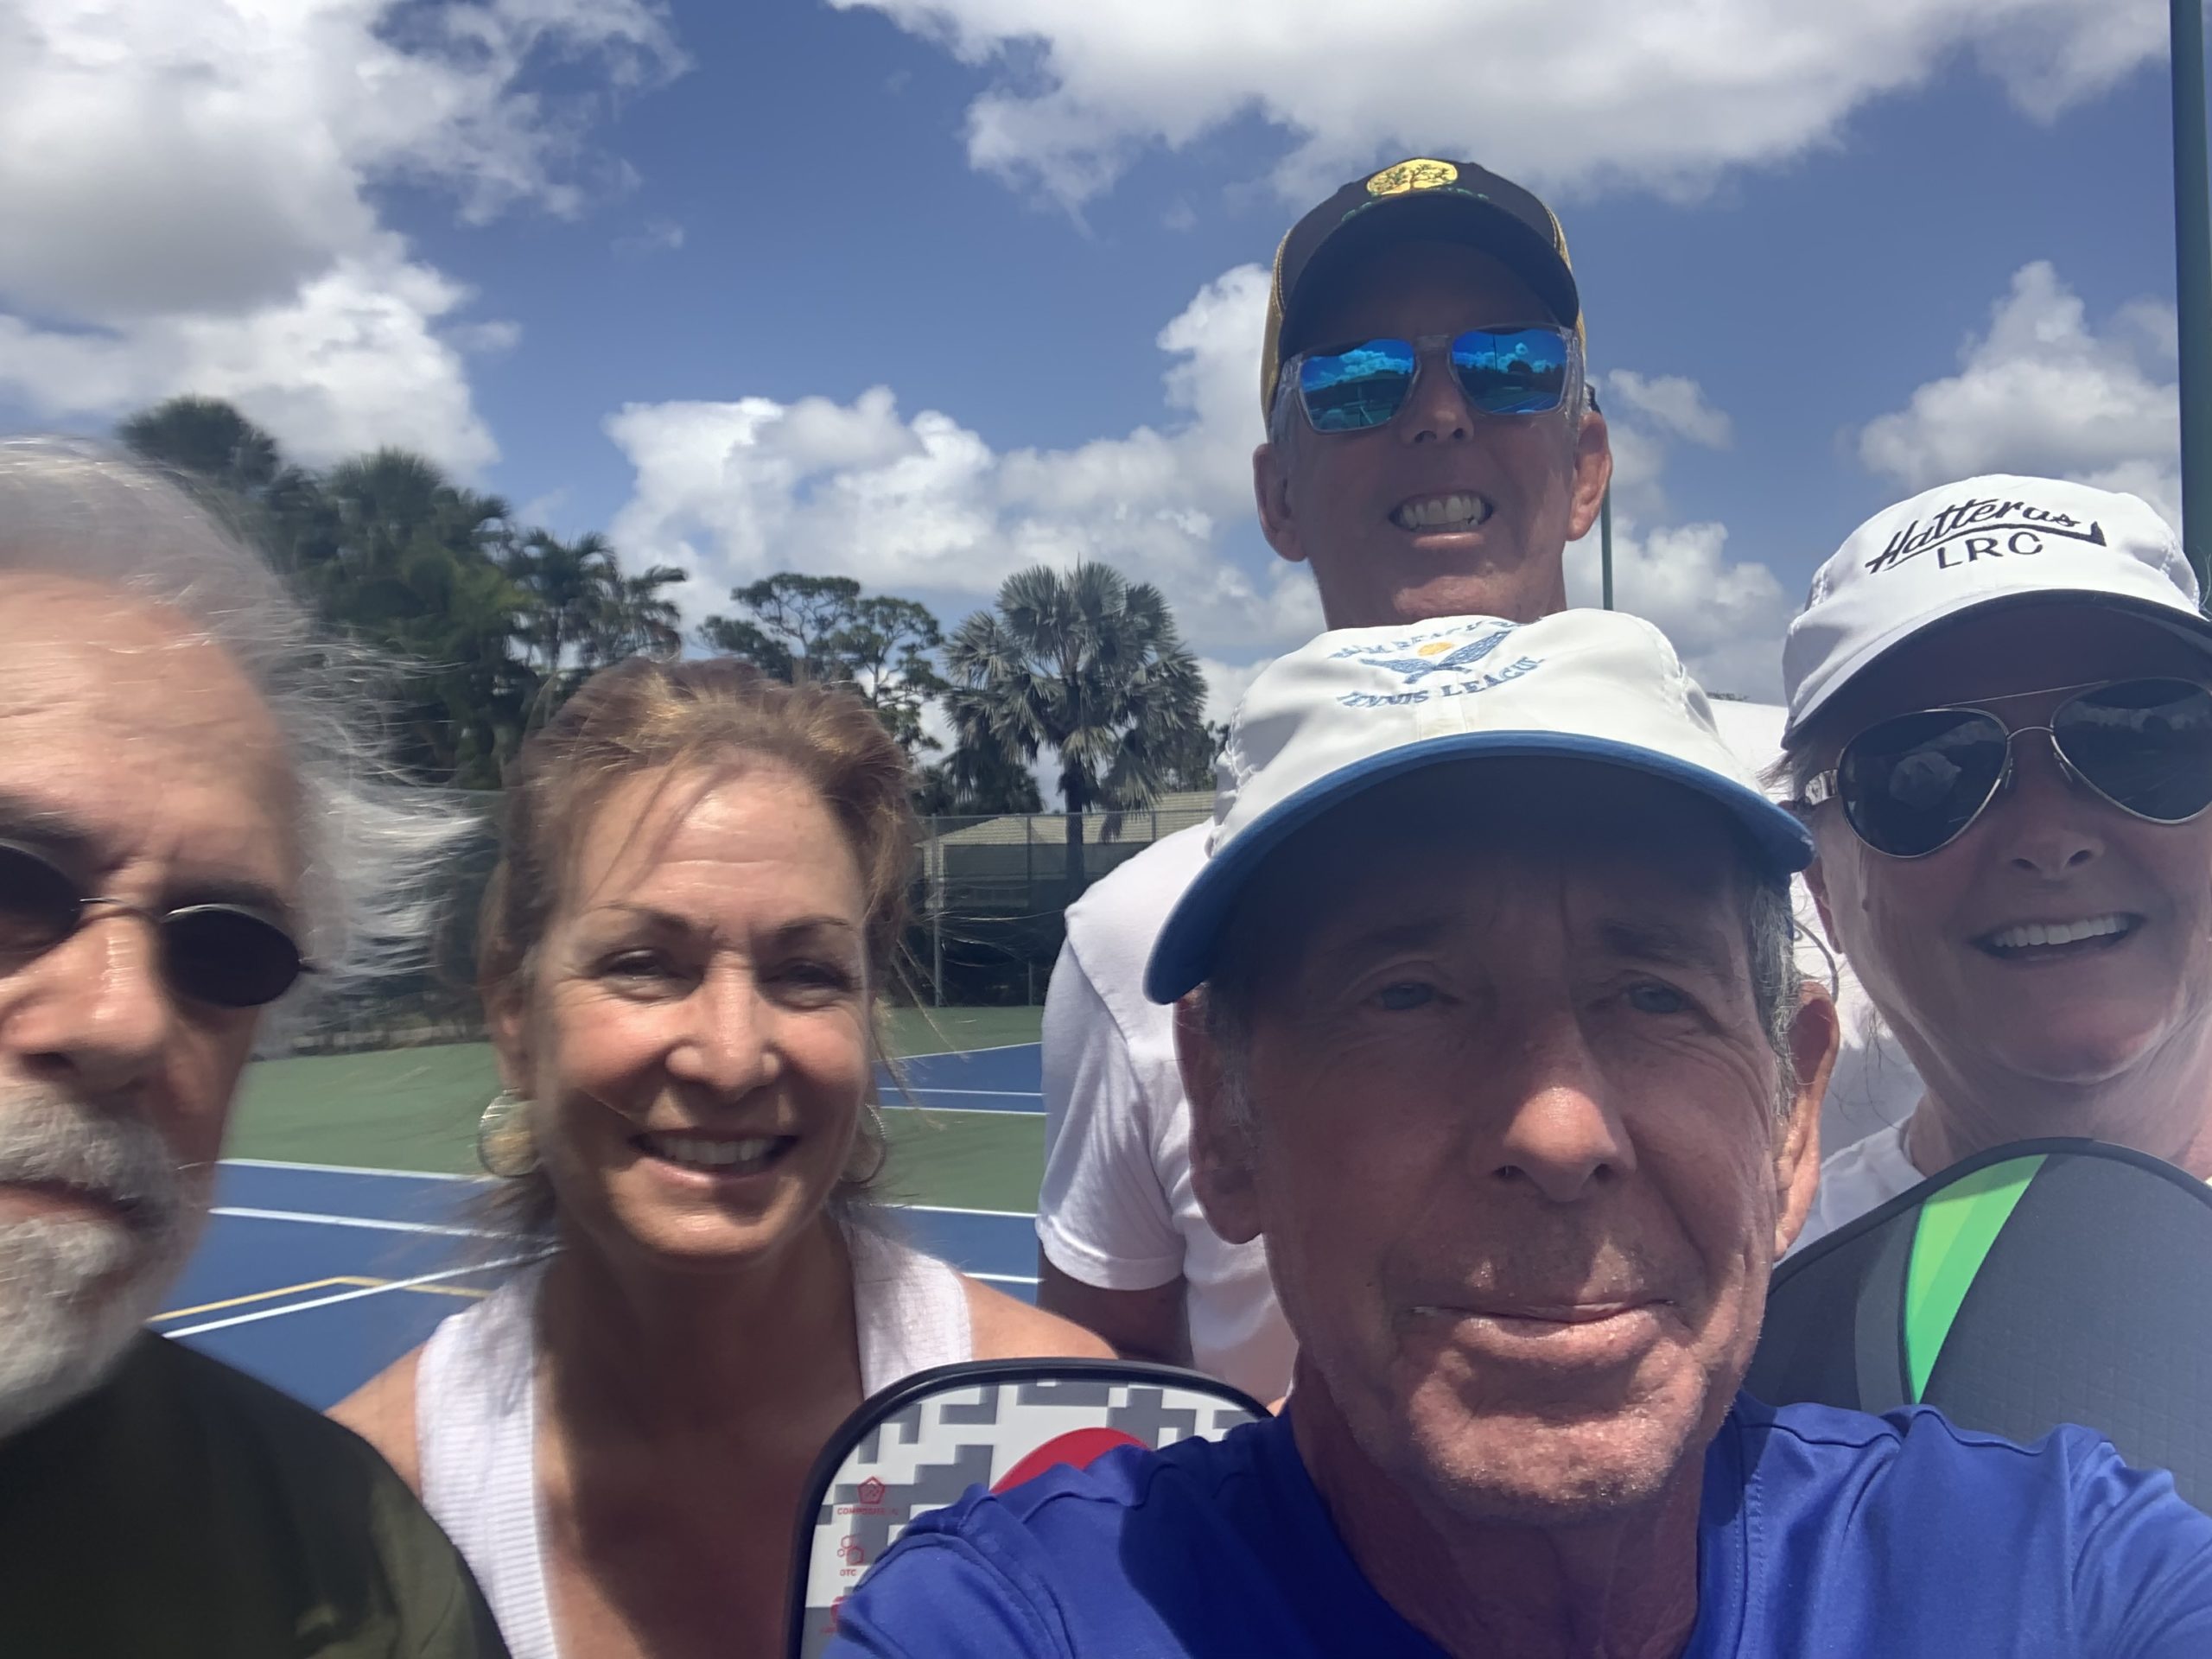 bob-with-steve-jeff-melissa-and-kathy-after-a-beginners-pickleball-clinic-in-lake-worth